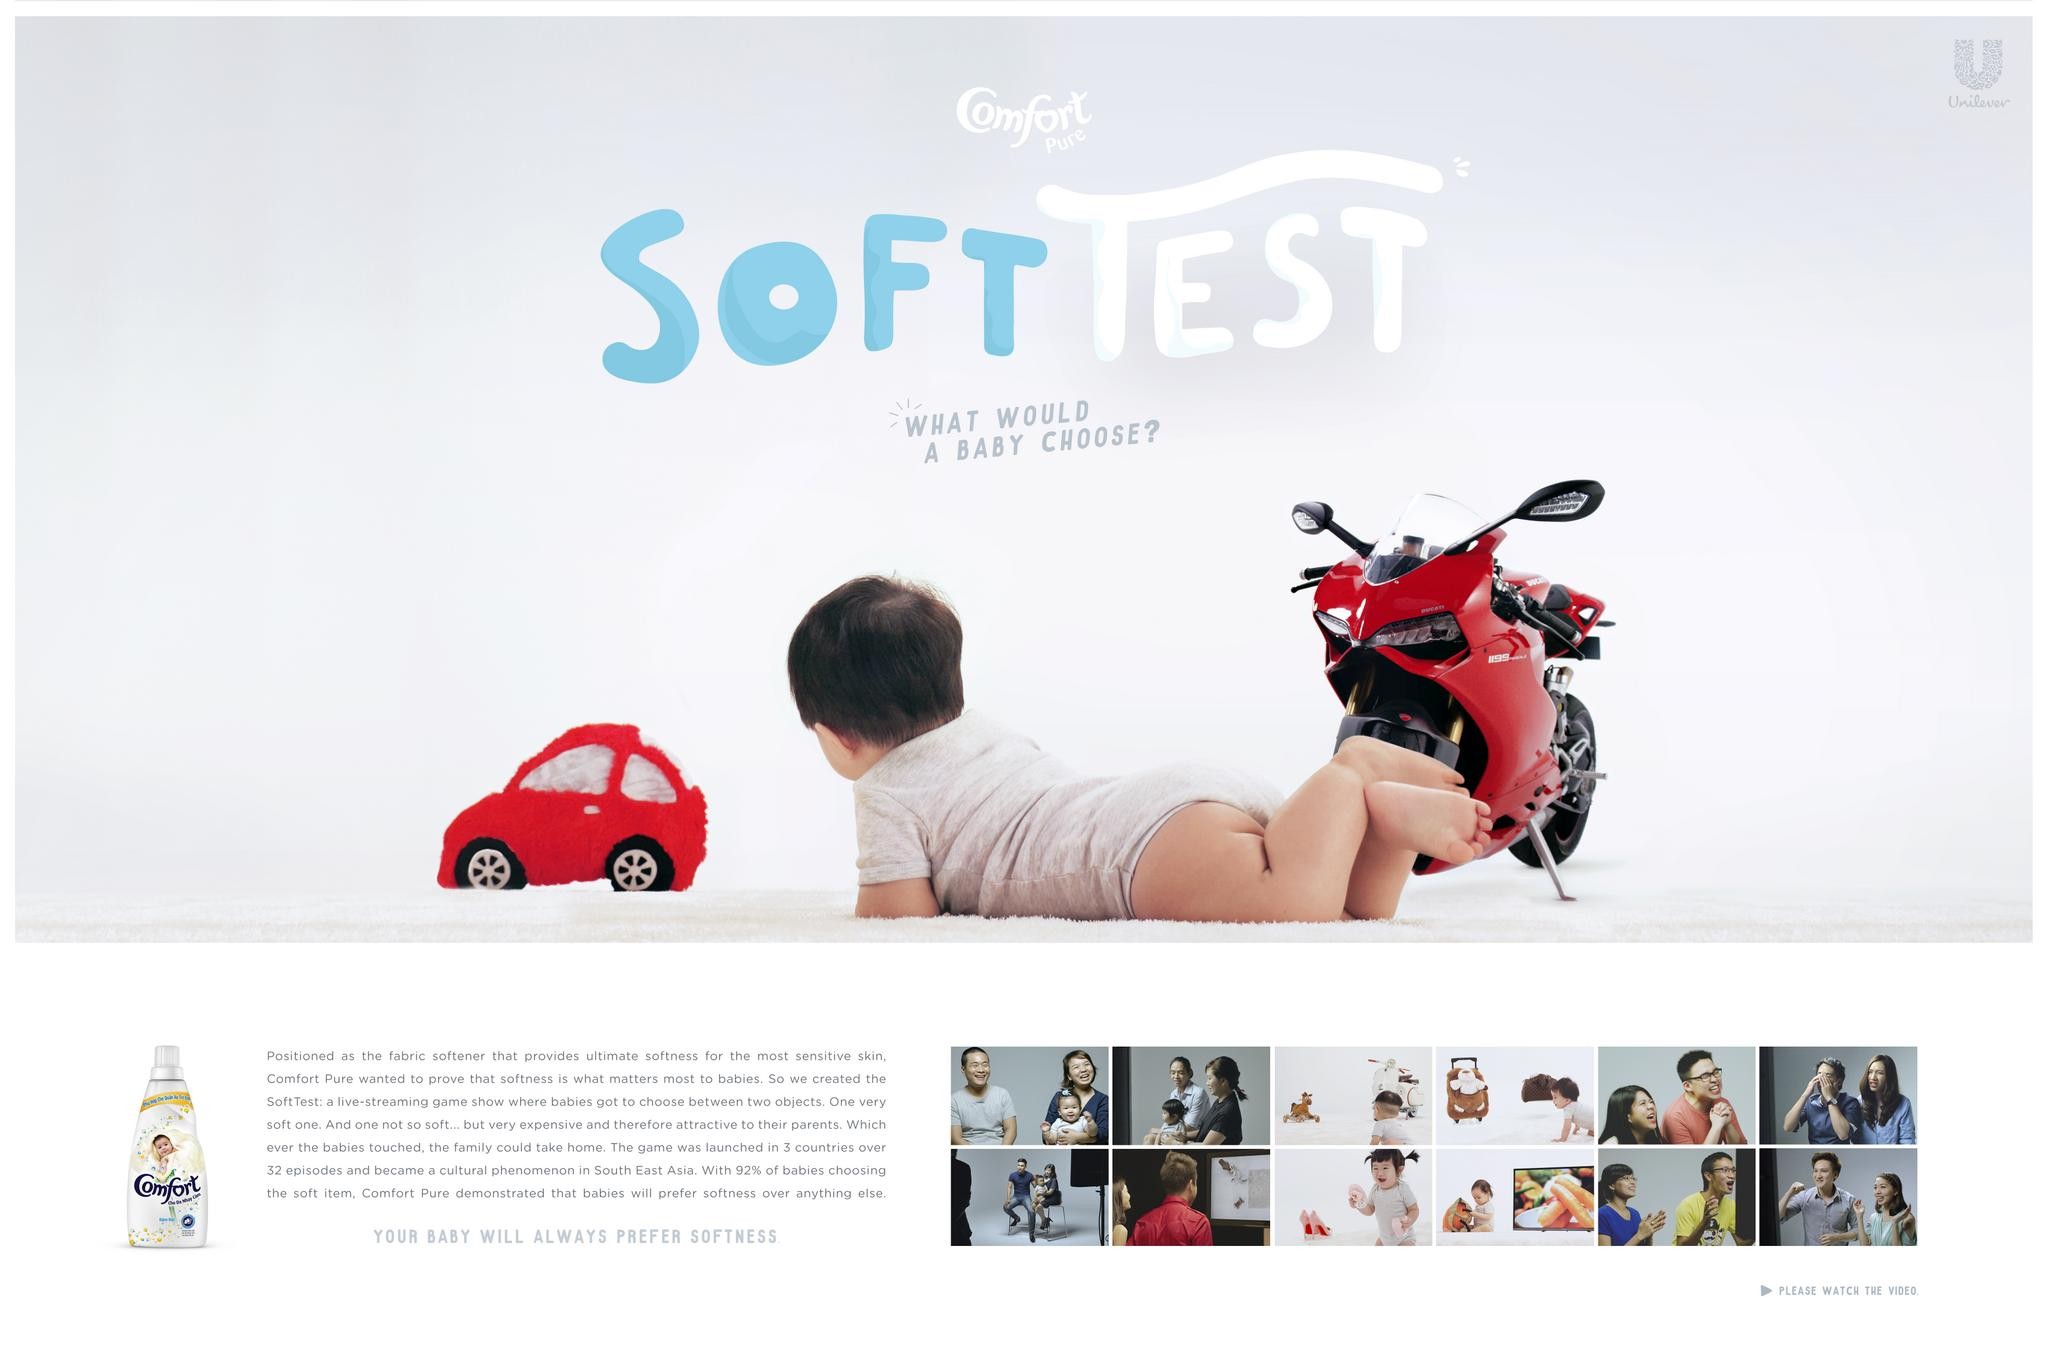 SOFTTEST